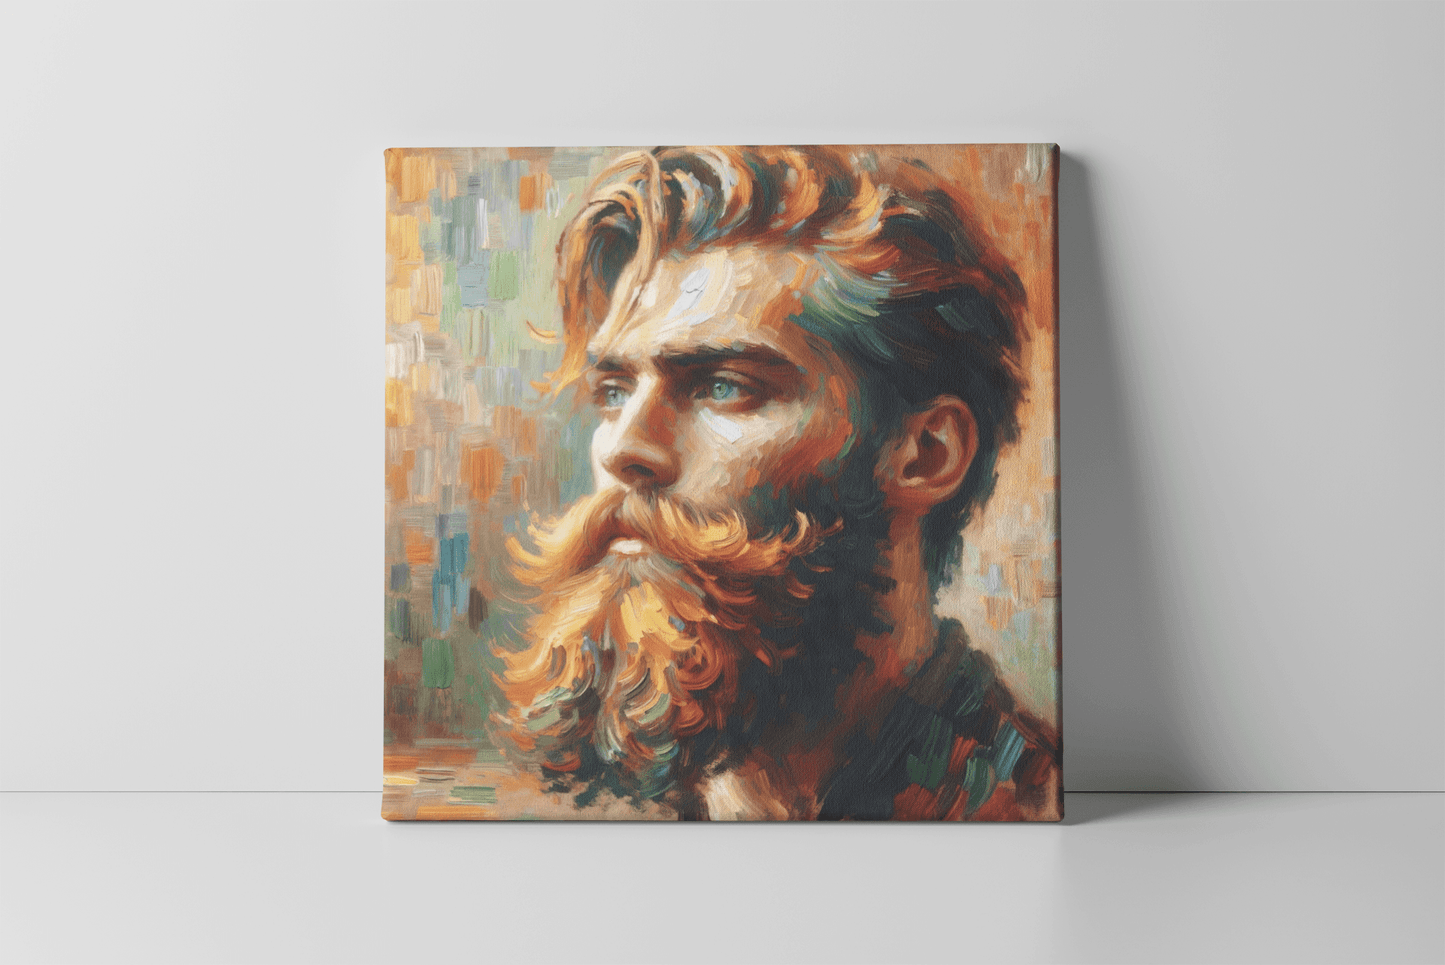 a painting of a man with a beard